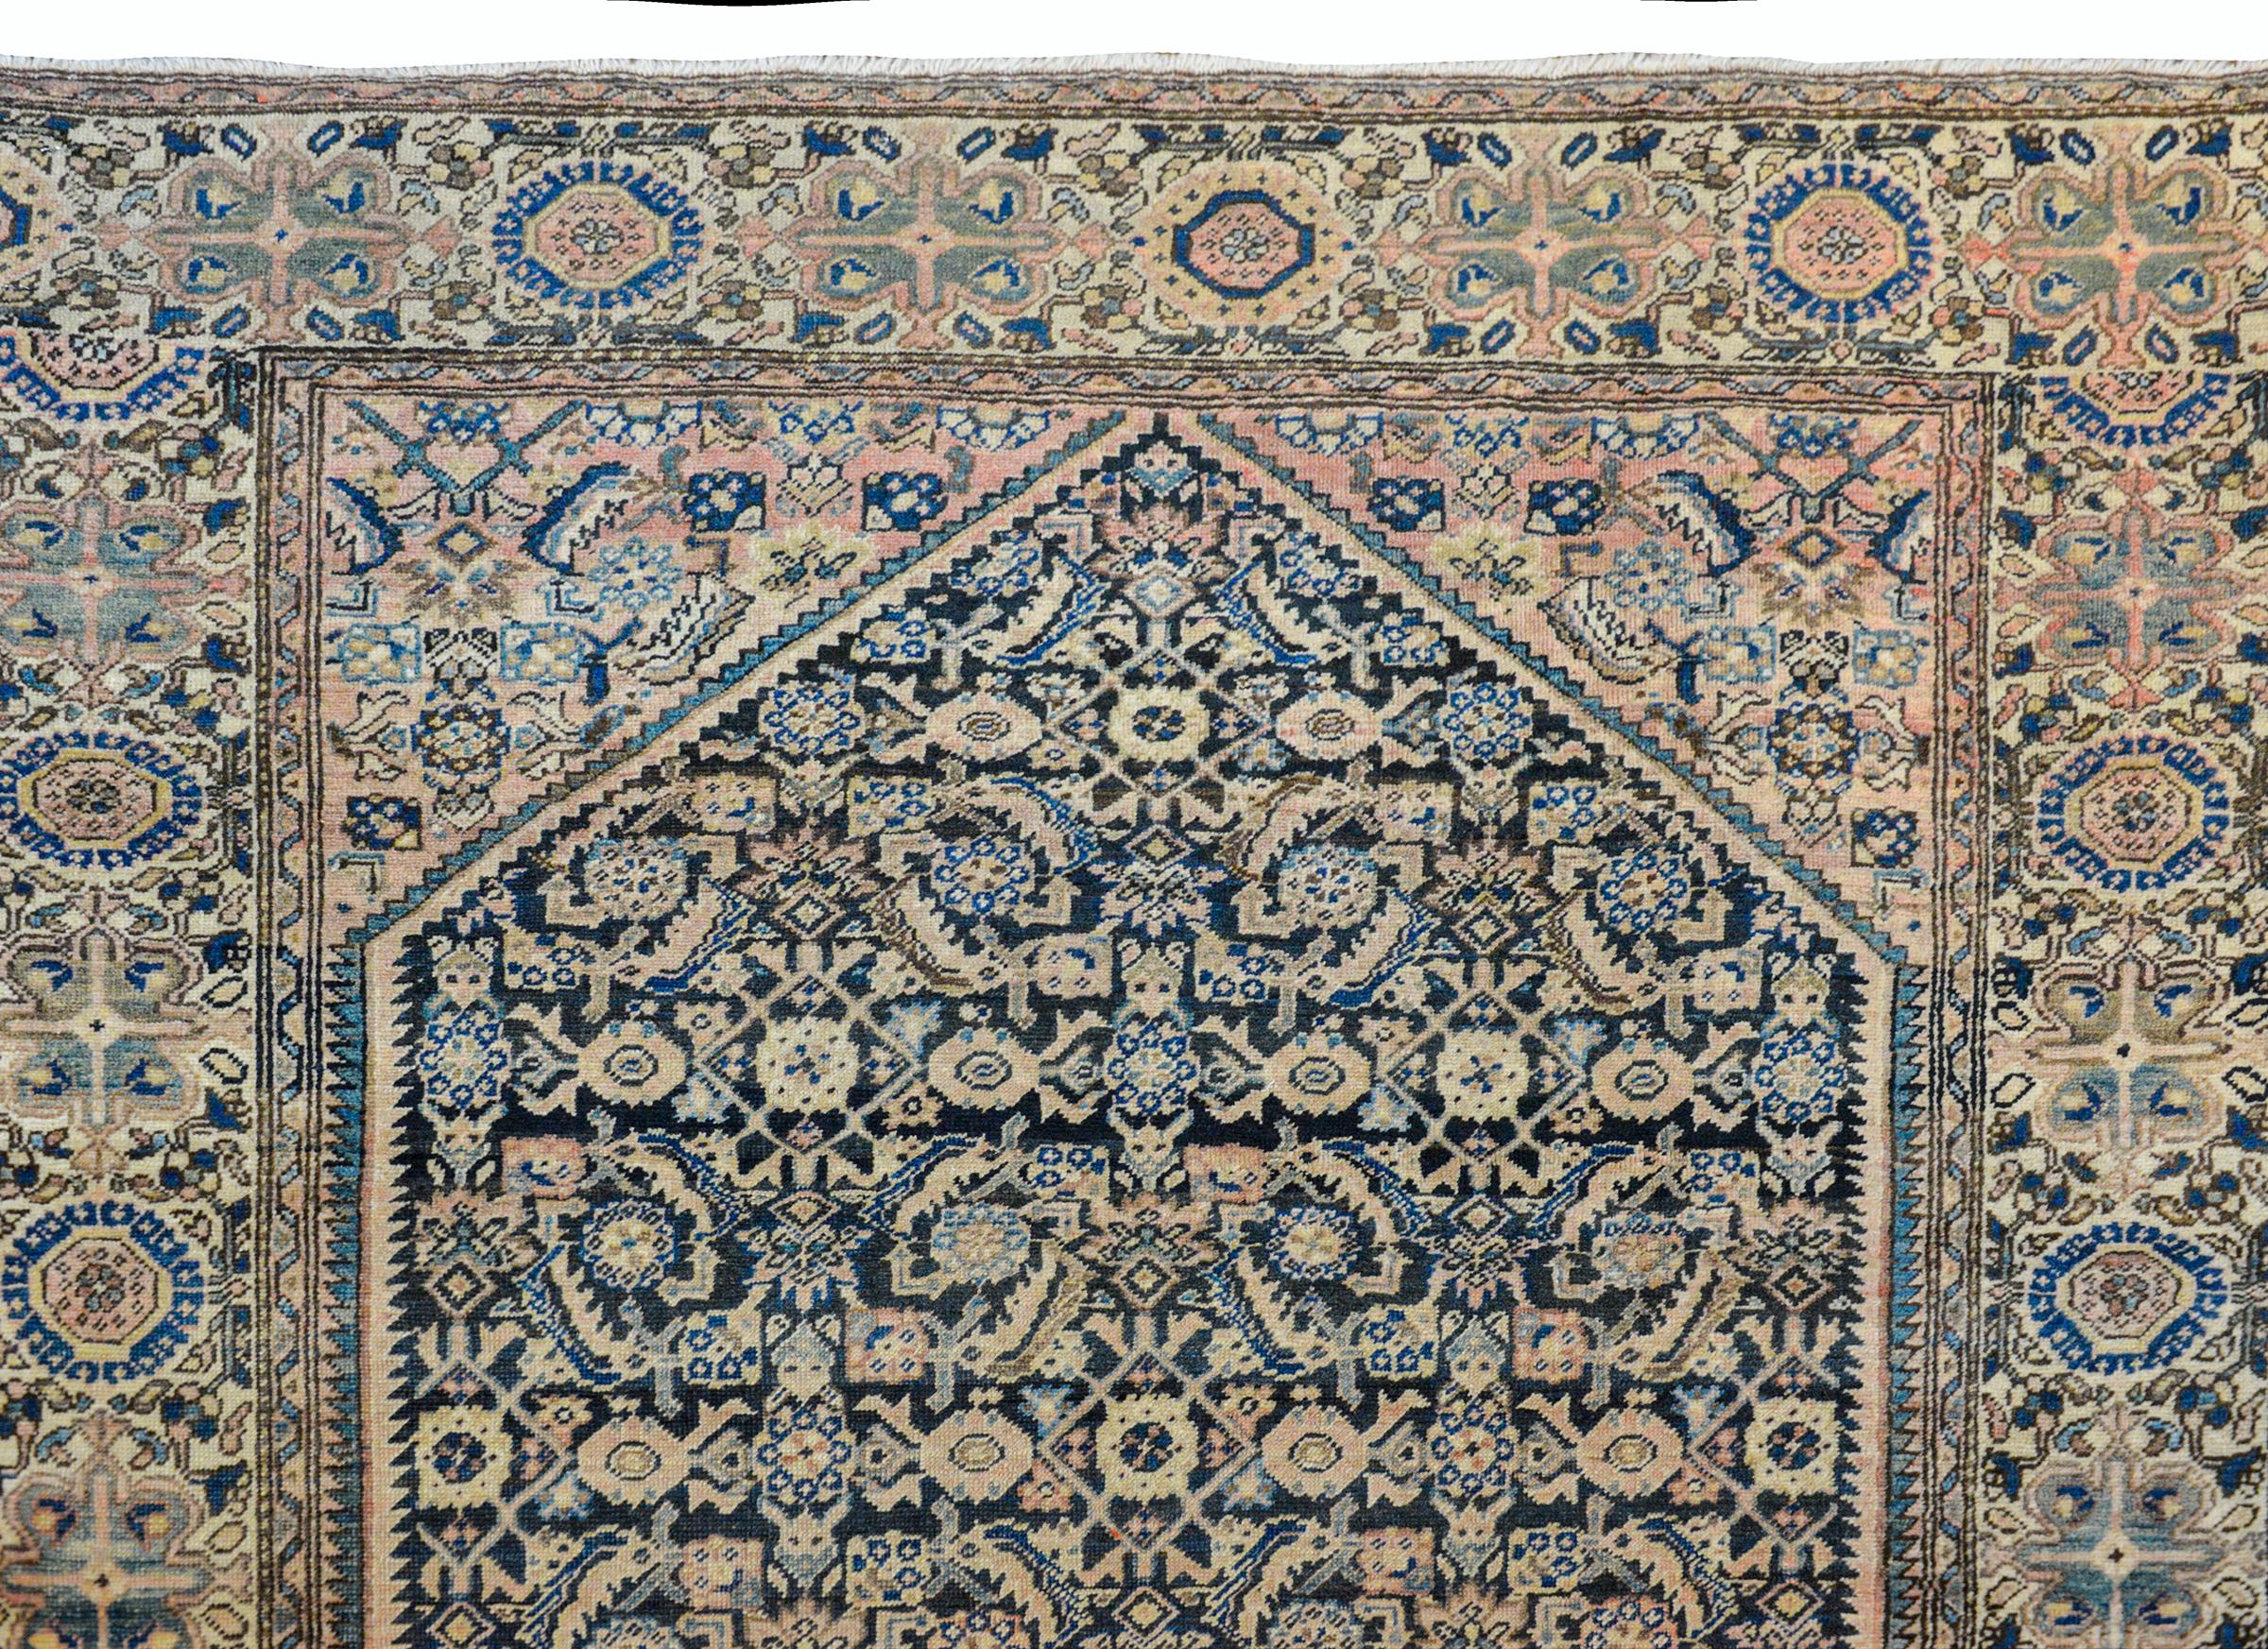 An outstanding early 20th century Persian Sarouk Farahan rug has been antique washed with a large central diamond woven in with a trellis leaf and flower pattern and woven in pale pink, gold, and light indigo, against an abrash dark indigo